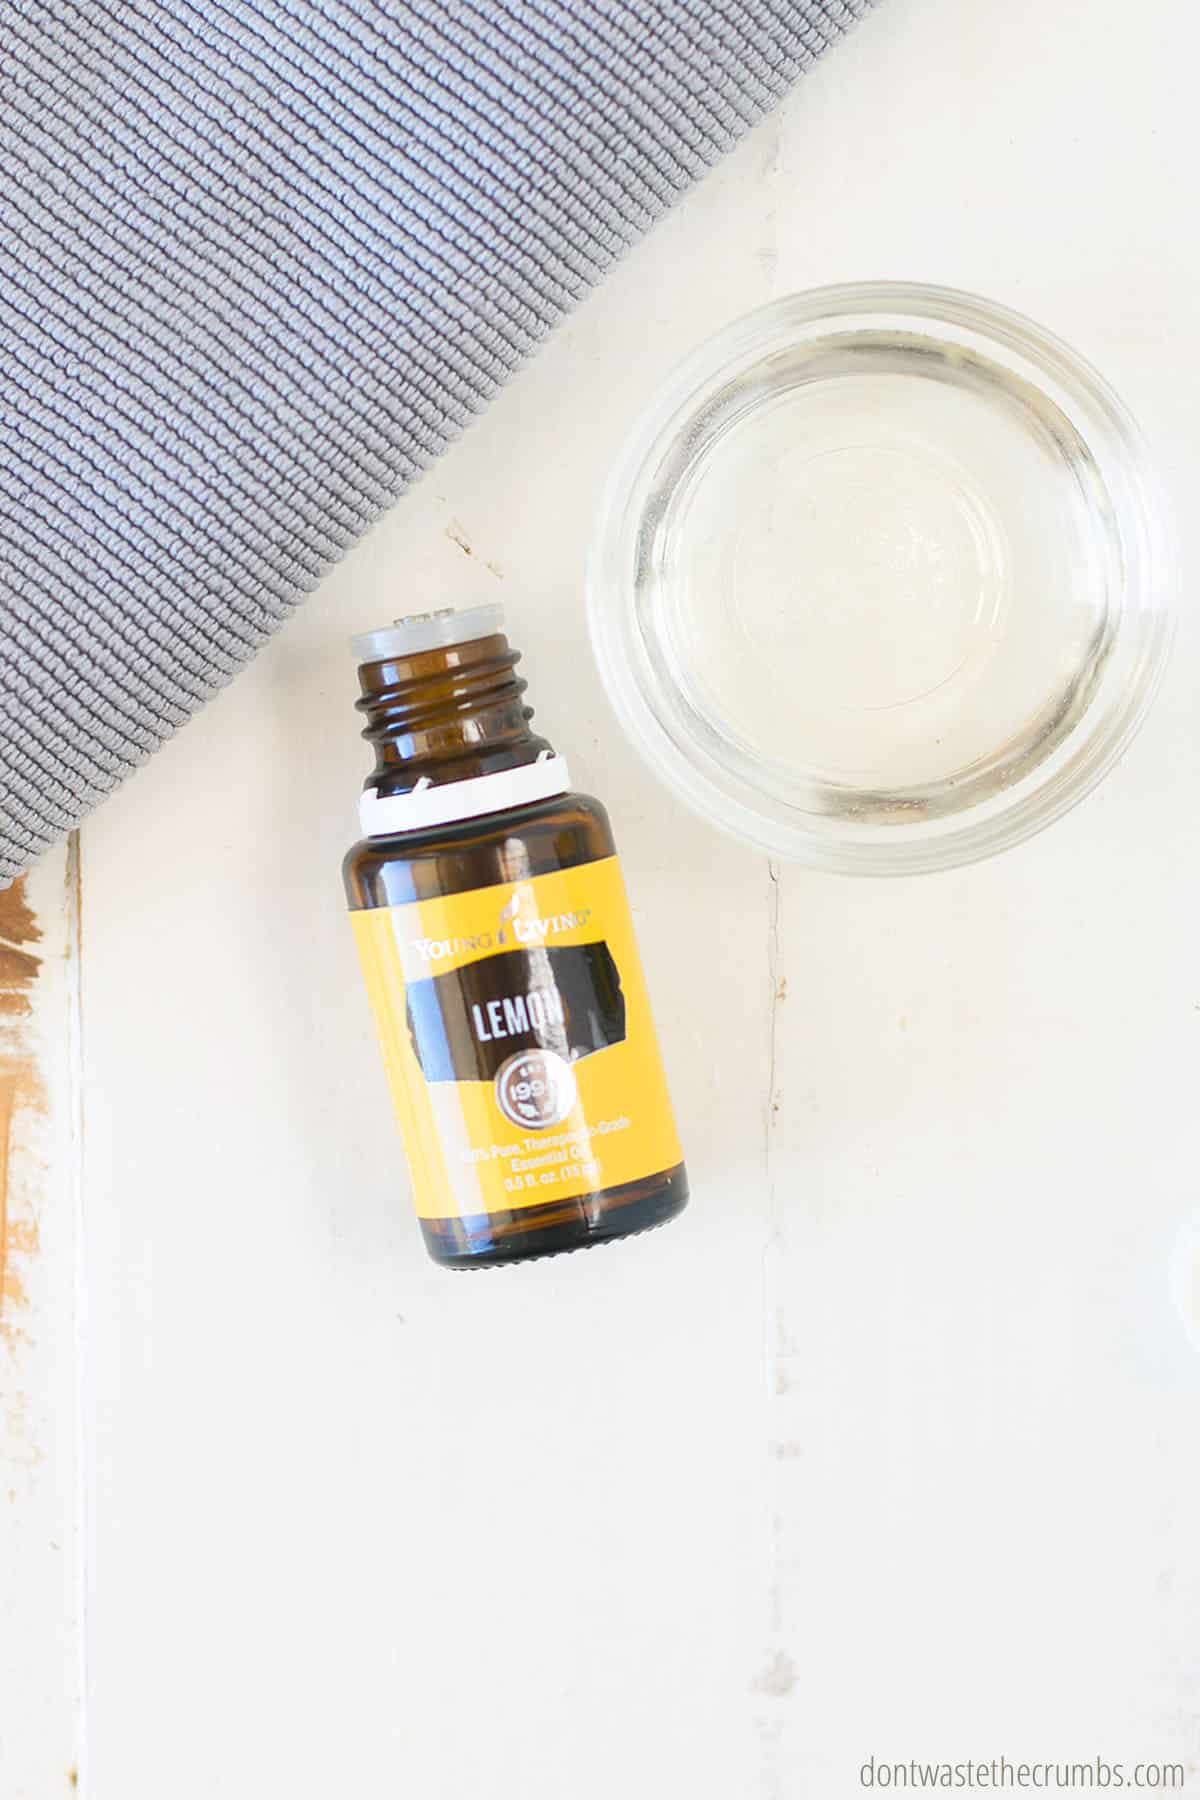 Opened bottle of lemon essential oil and small glass bowl